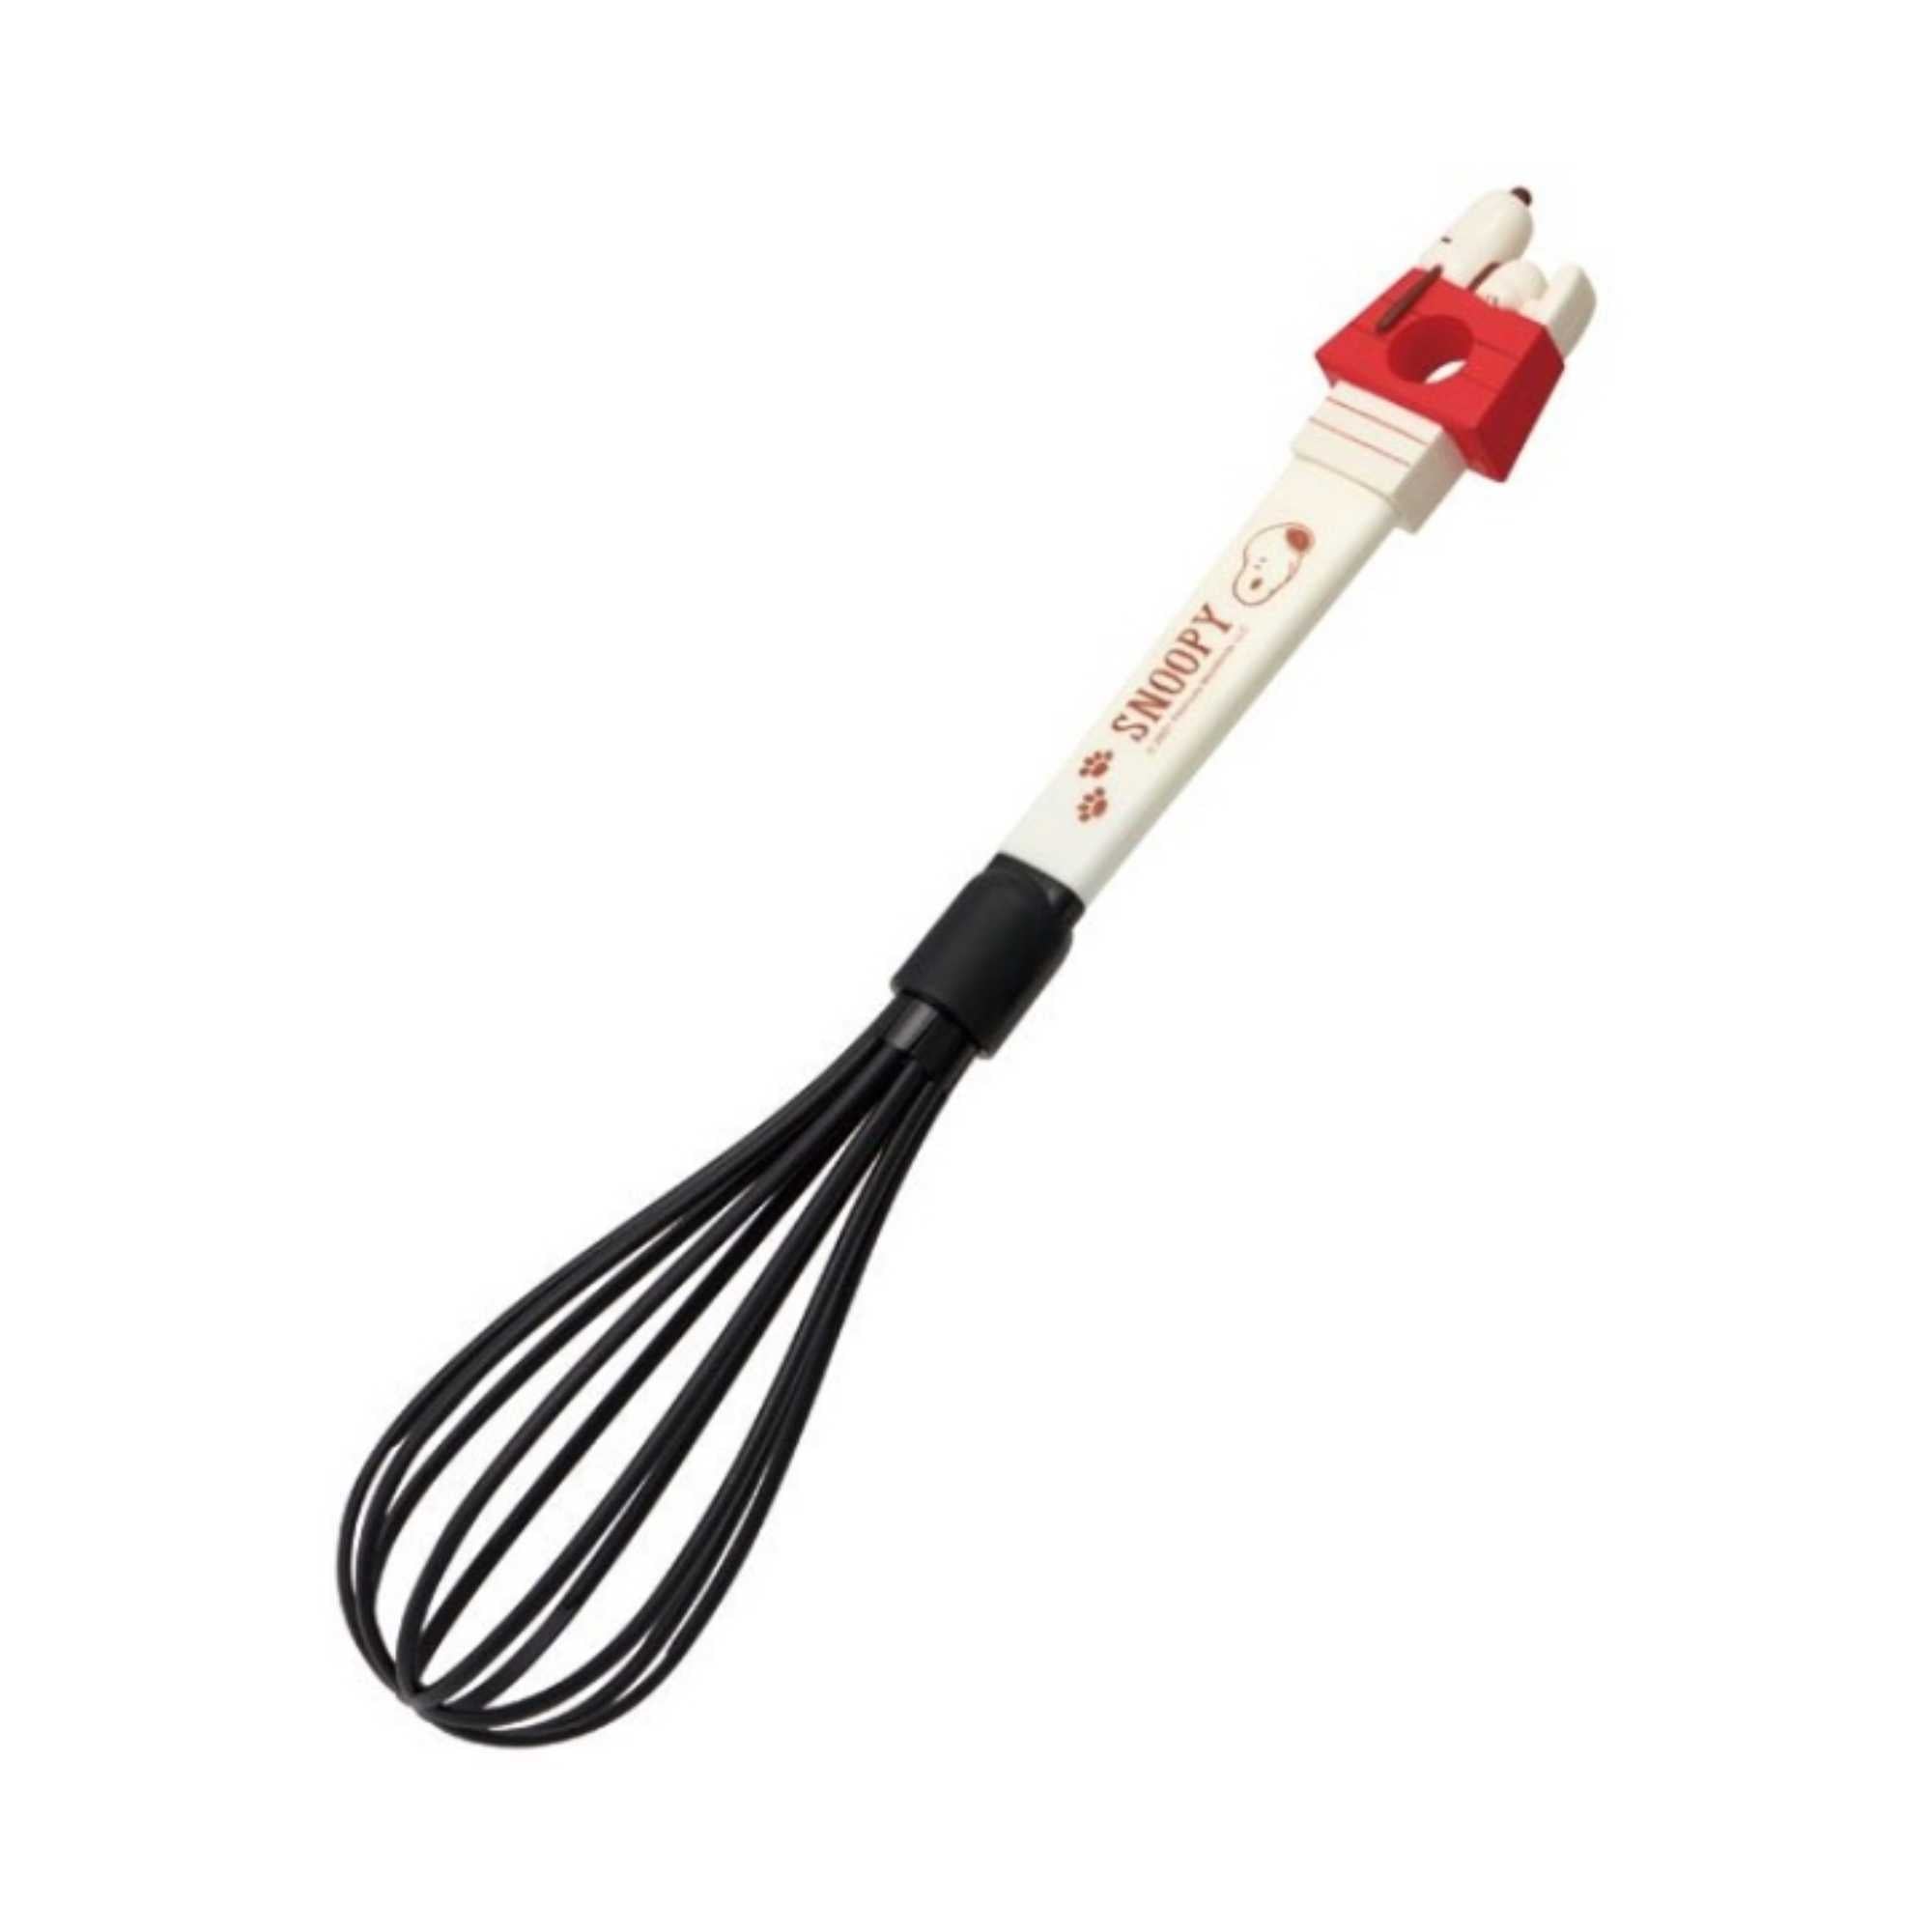 Snoopy Cooking Whisk/Whipper